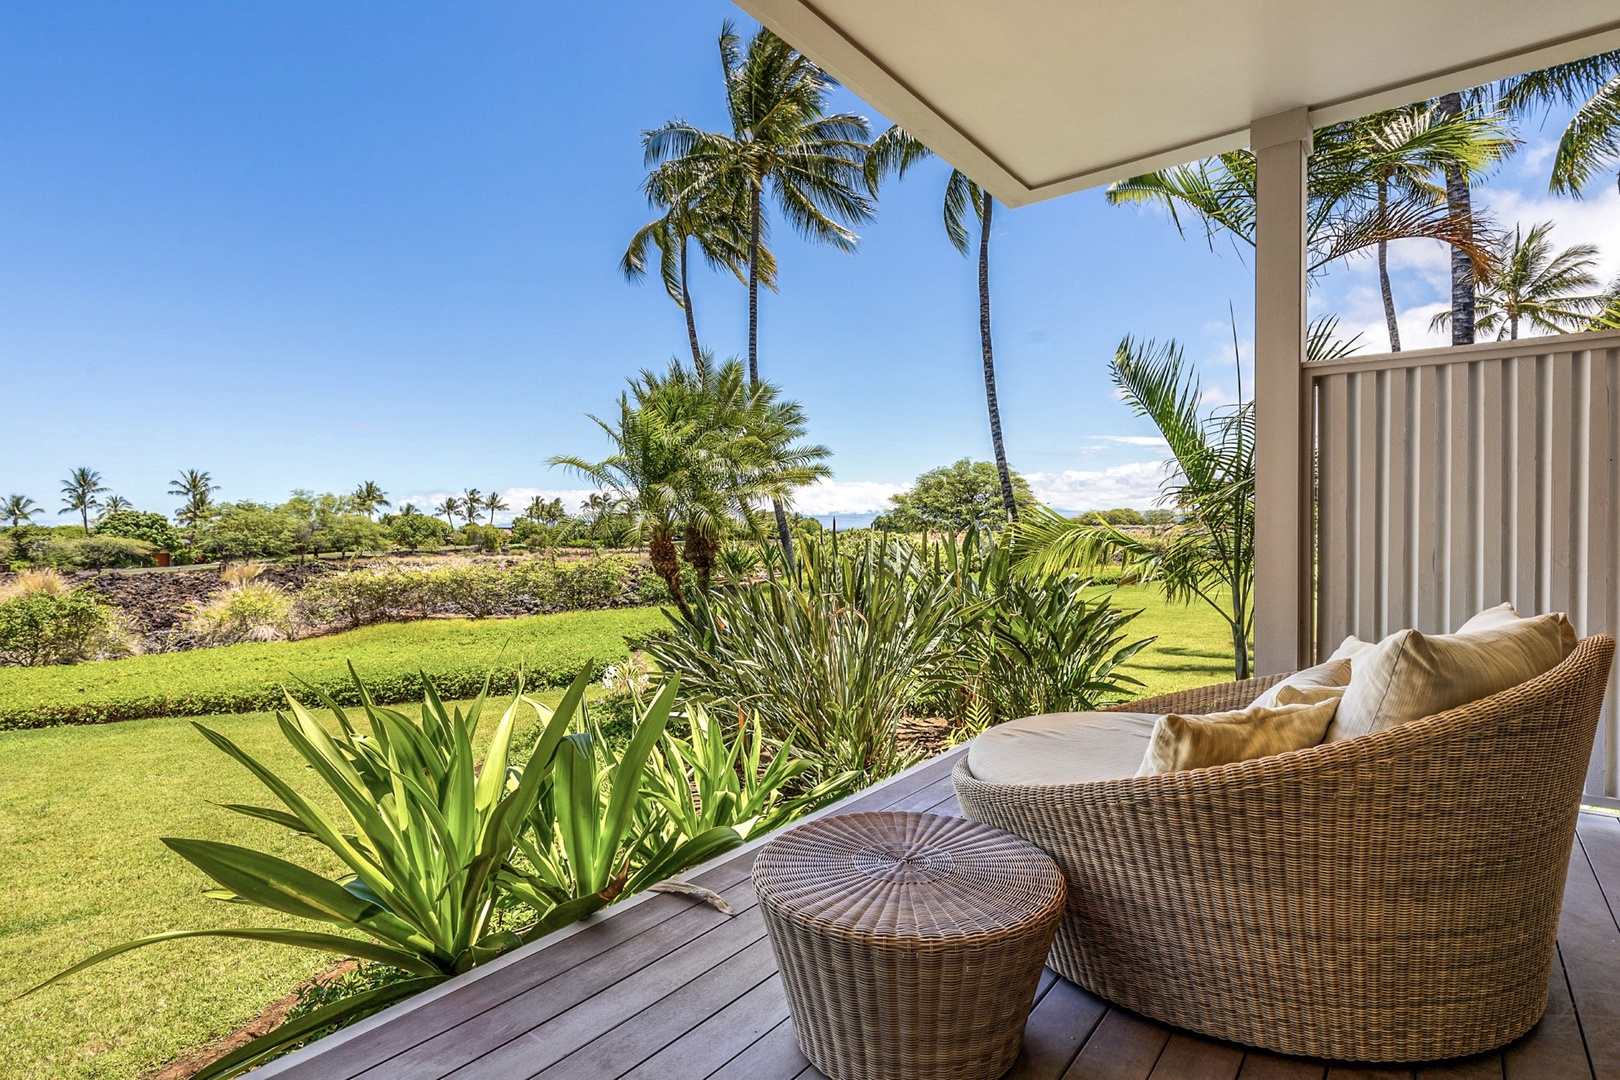 Kailua Kona Vacation Rentals, 3BD Ka'Ulu Villa (131C) at Four Seasons Resort at Hualalai - Retreat room deck with stairs down to private grassy lawn area. Perfect for families!